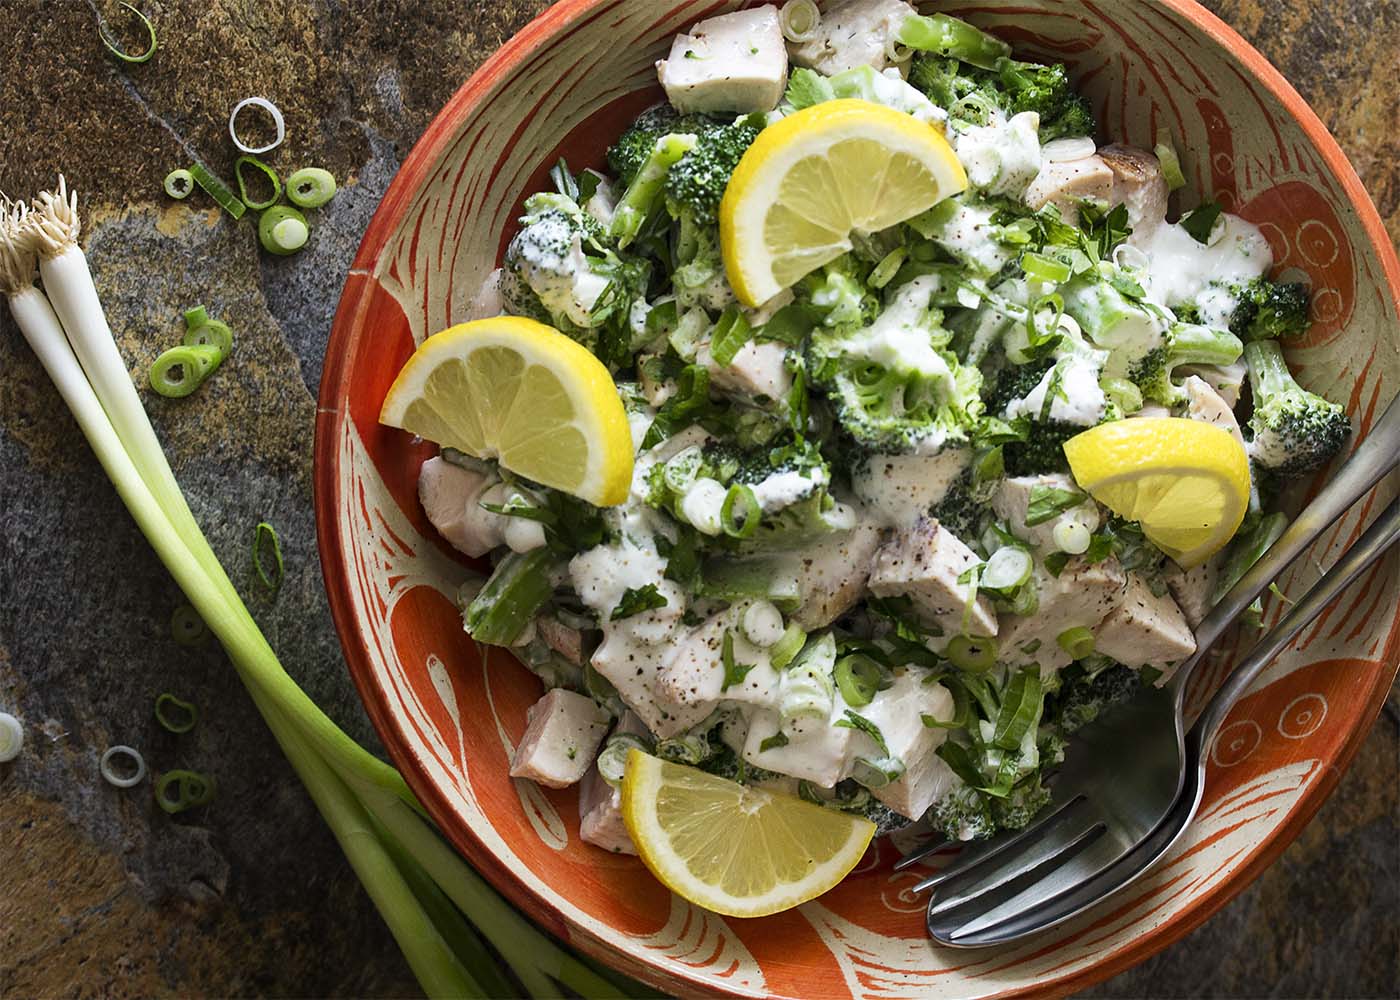 Salad of Broccoli and Chicken with Lemon Dressing